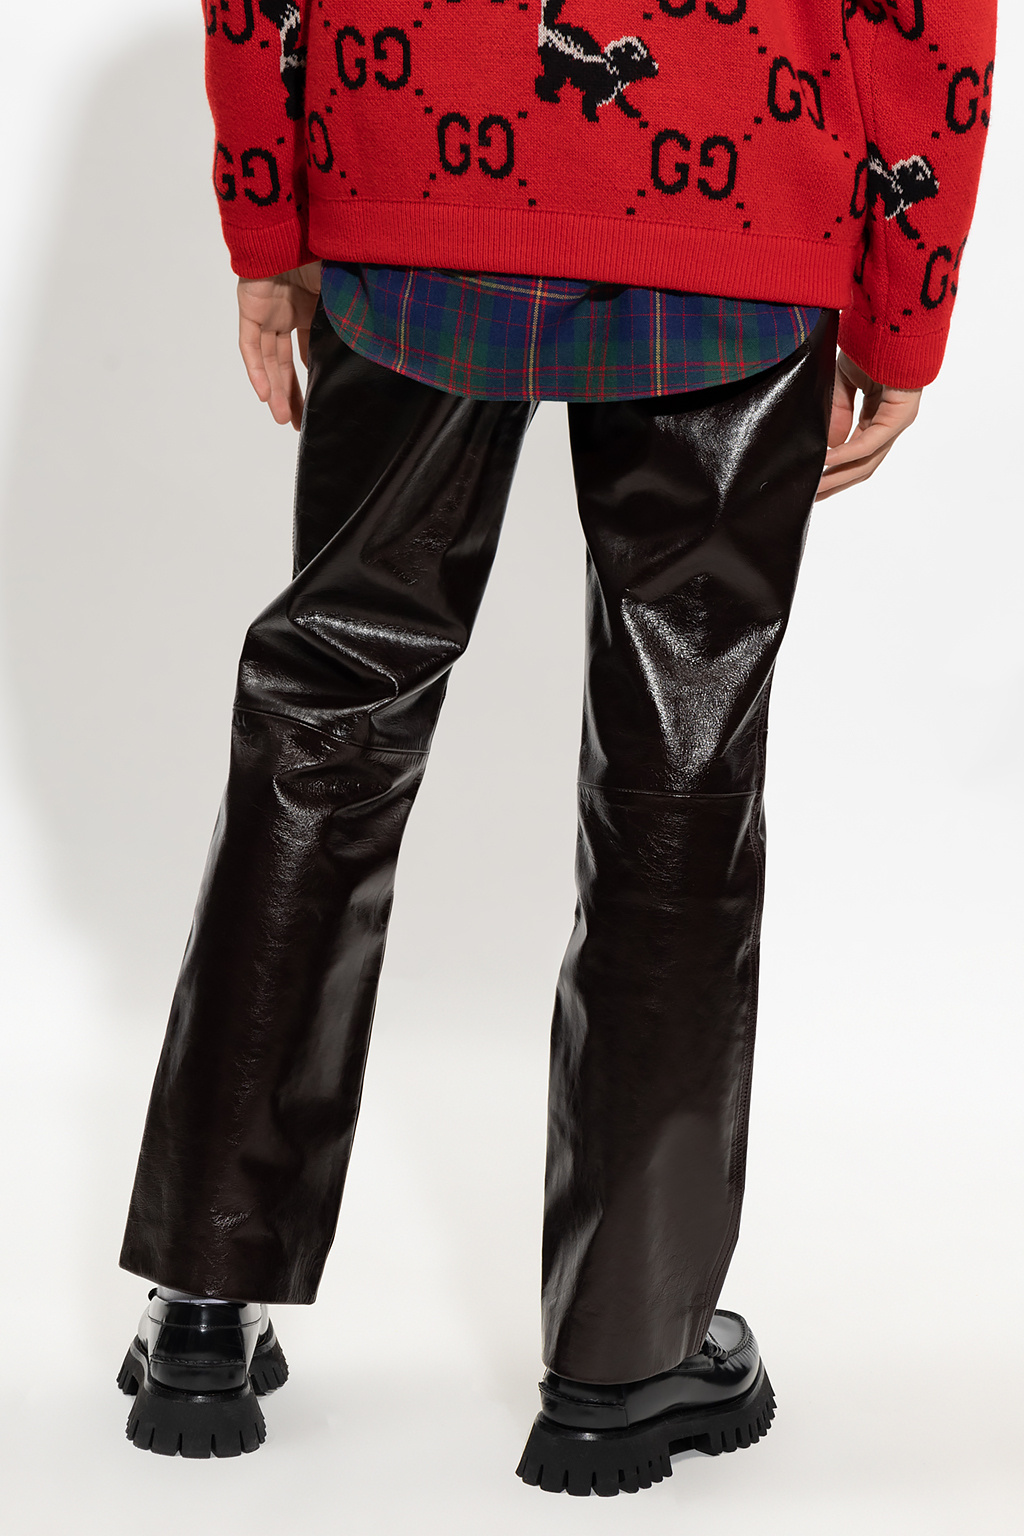 Gucci Leather has trousers